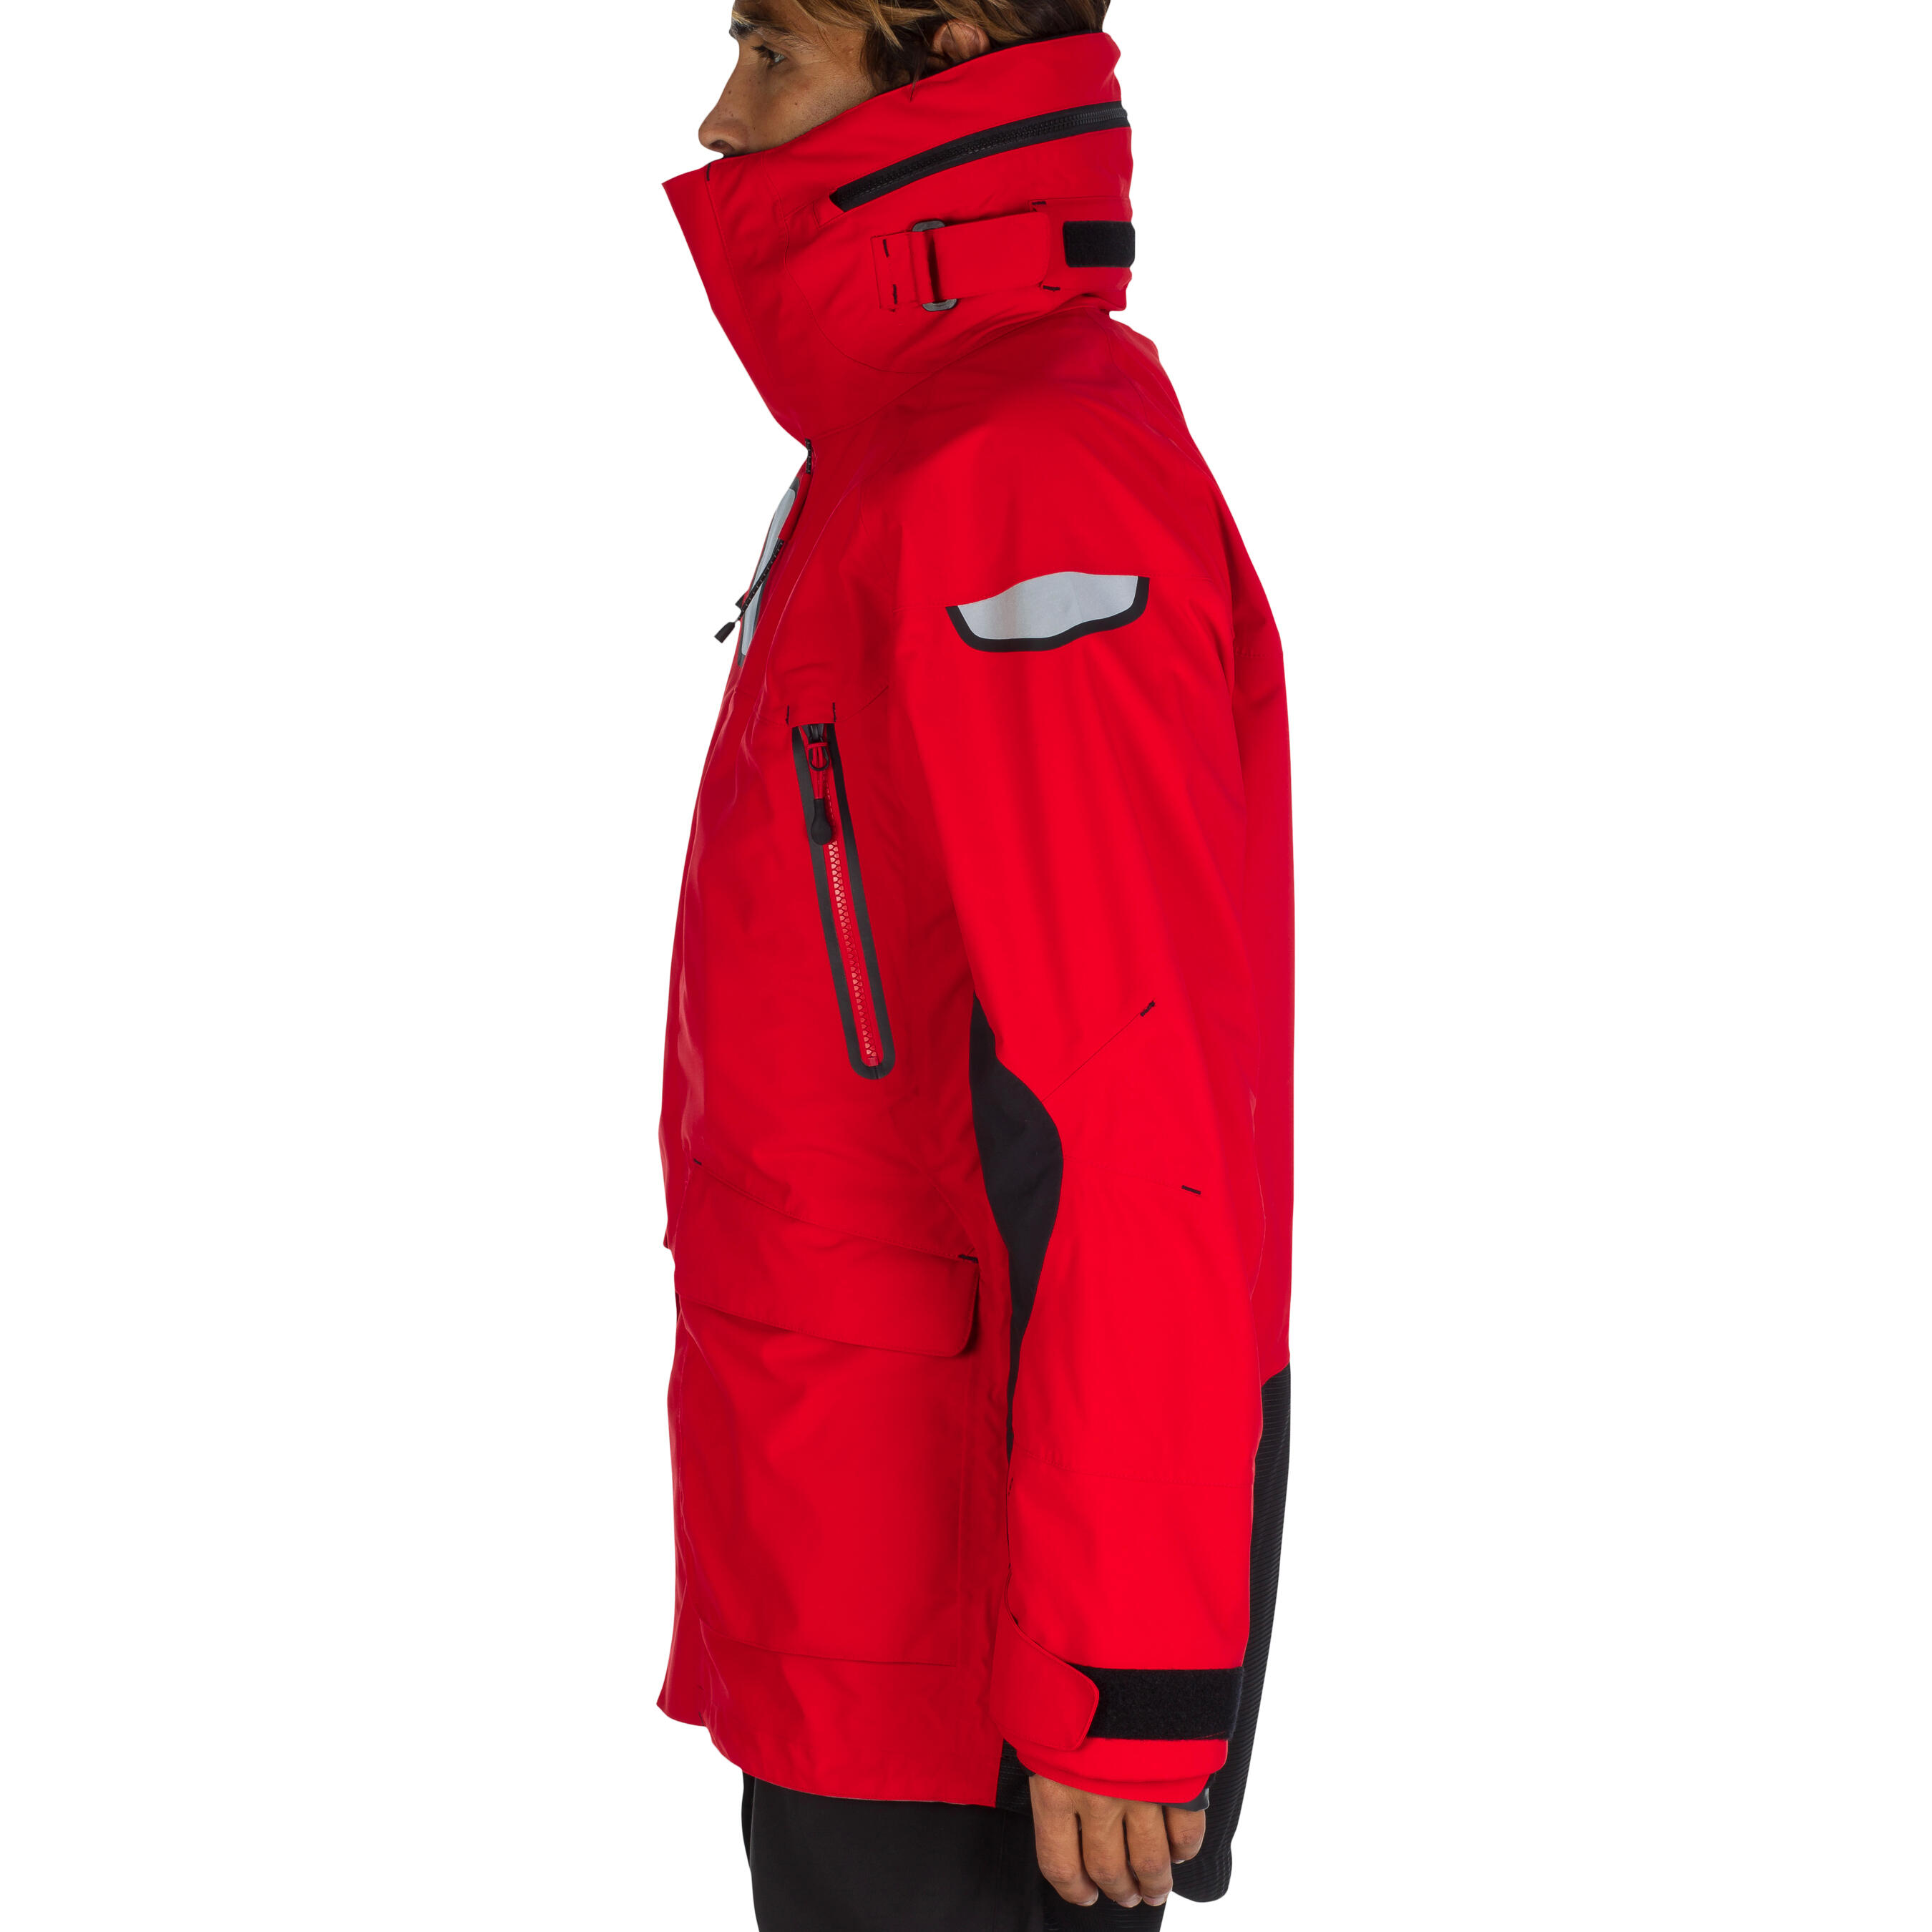 Ozean 900 Men's Waterproof and Breathable Sailing Jacket - Red 10/44